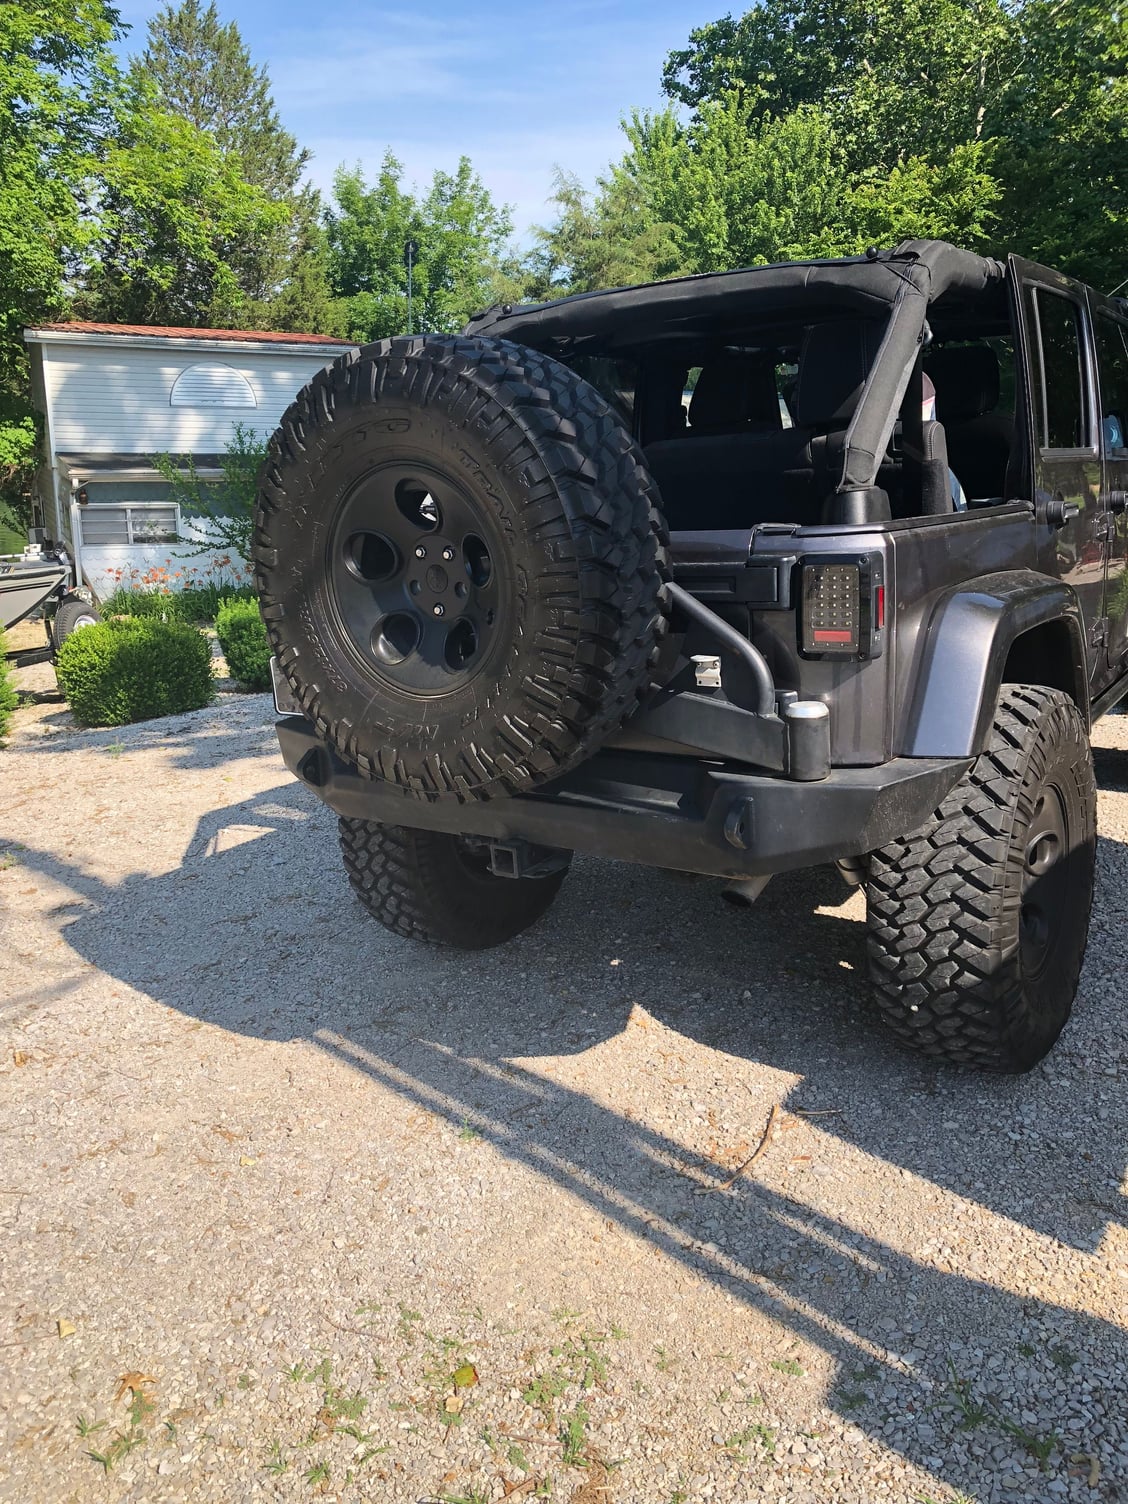 Exterior Body Parts - Expedition One Rear Bumper with Tire Carrier--$1000 OBO in KY - Used - 2007 to 2018 Jeep Wrangler - Louisville, KY 40245, United States